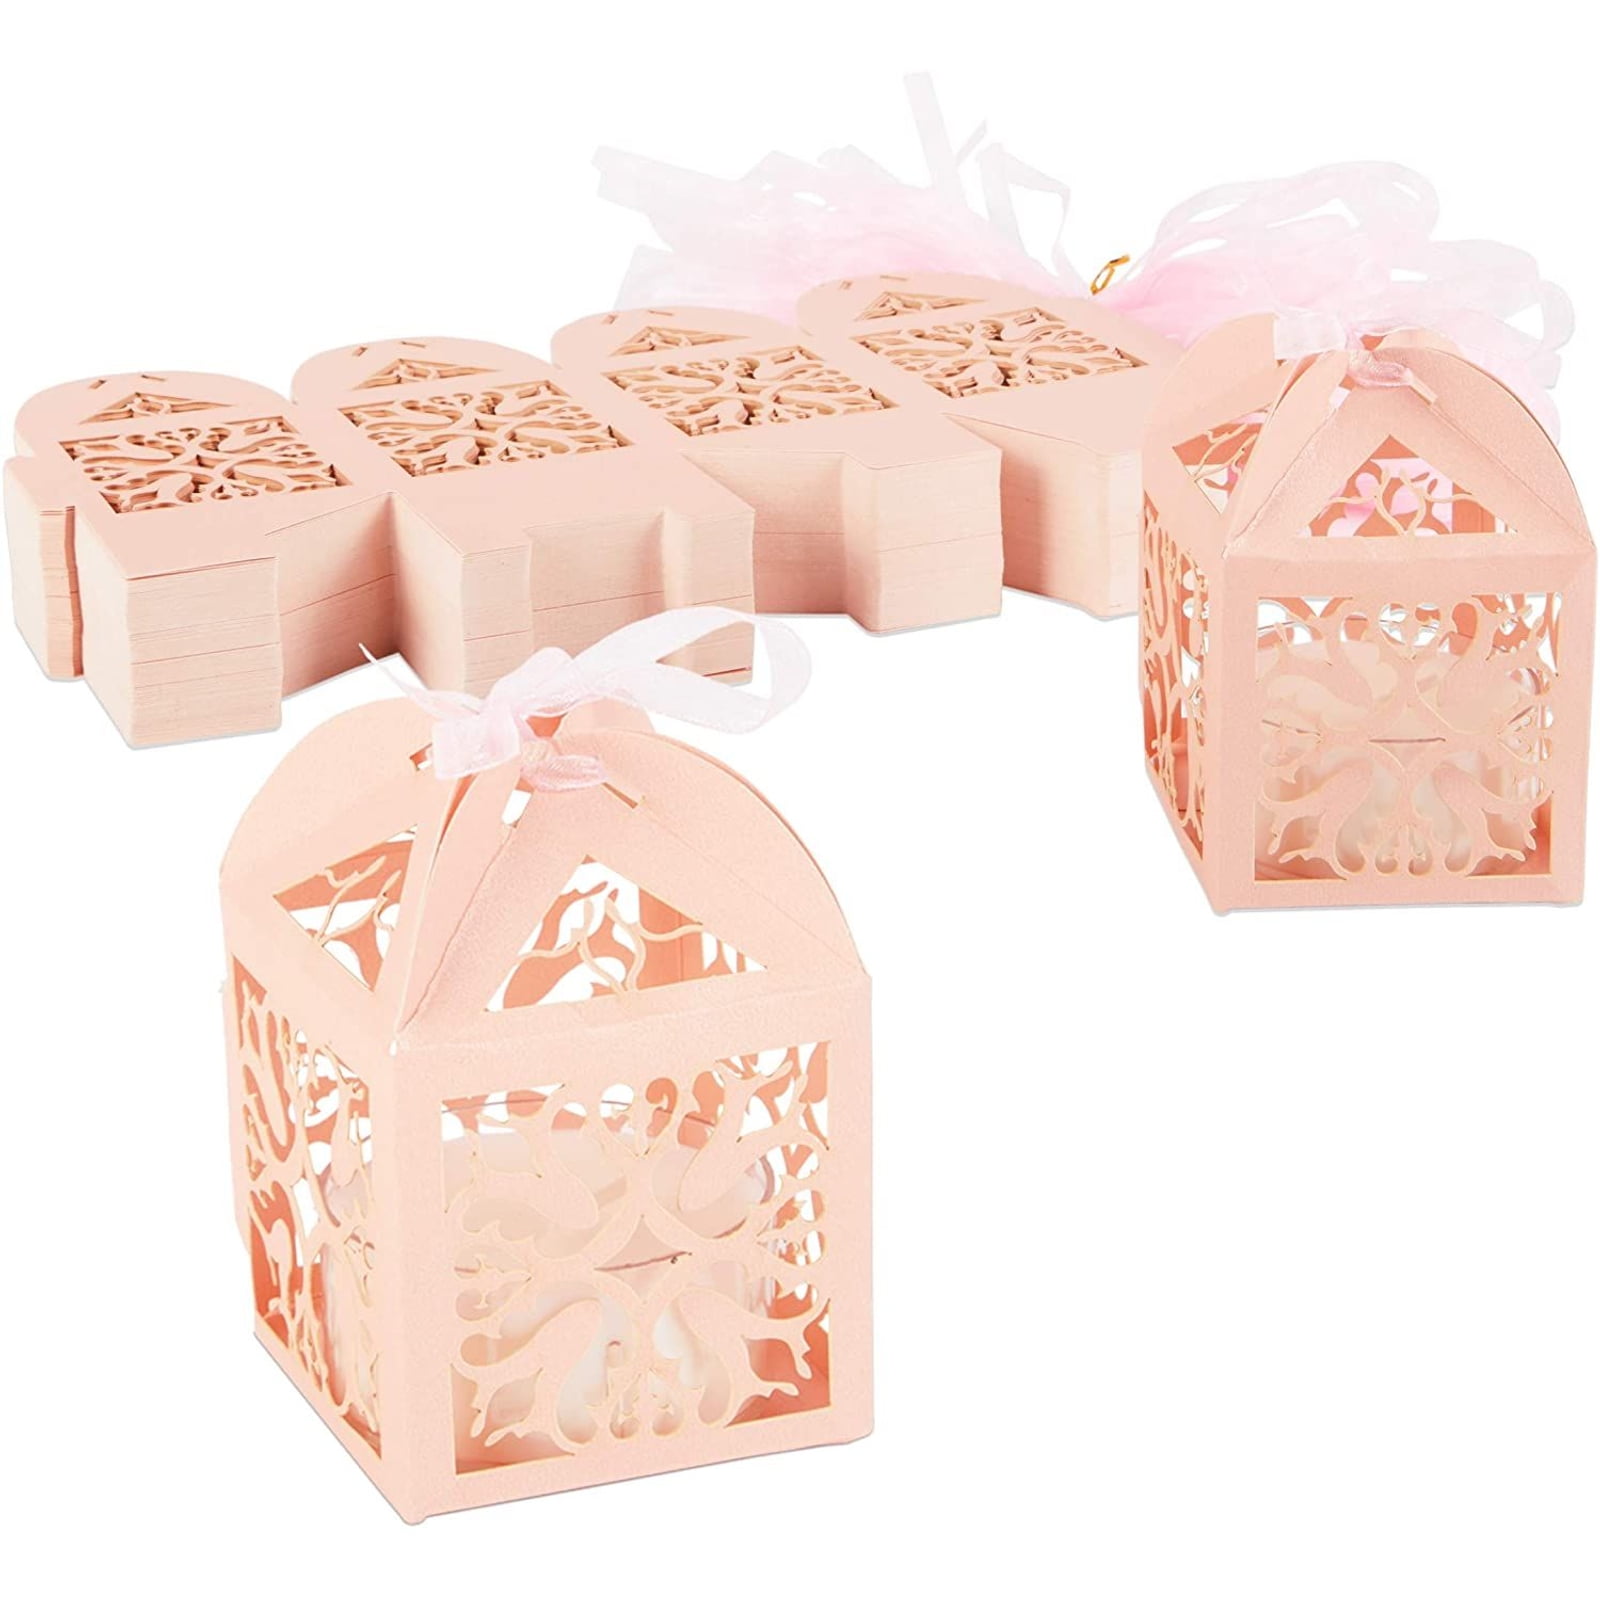 100 pcs Chocolate Brown Cute Favor Boxes with Ribbon Wedding Party Candy Gifts 